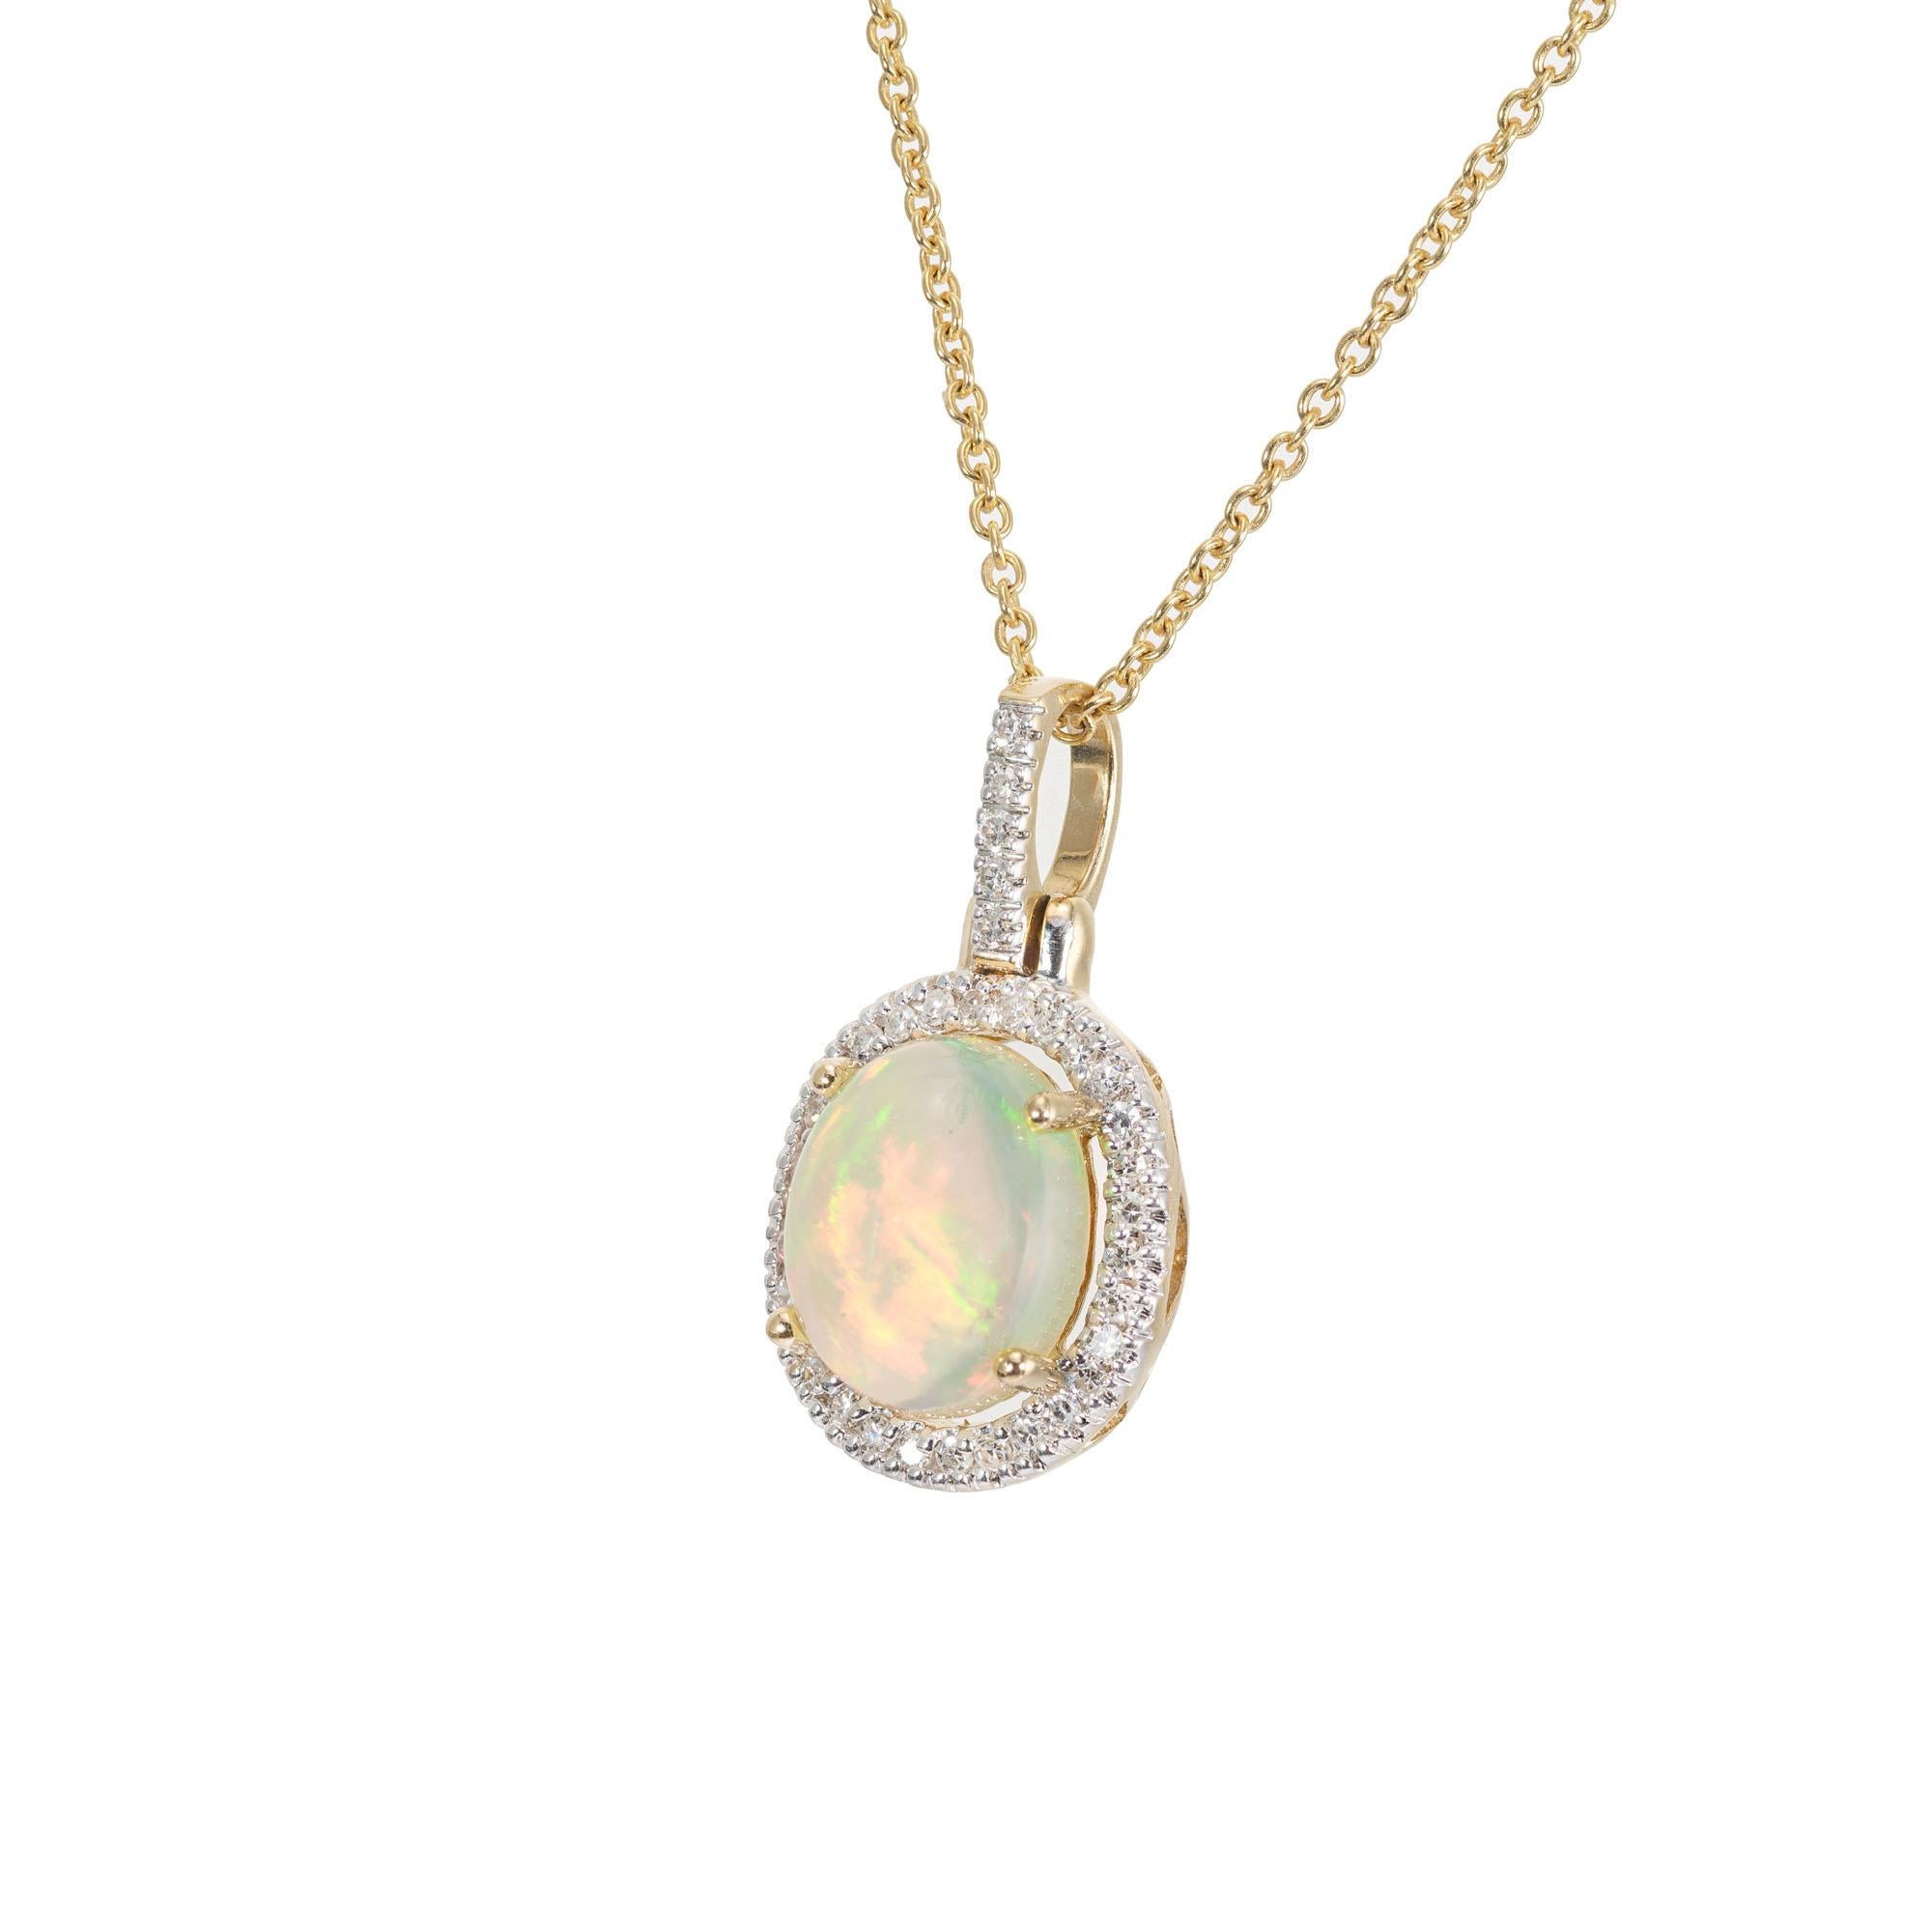 Opal and diamond pendant necklace. 2.25 oval opal with a halo of 35 single cut diamonds, in 14k yellow gold setting and 16 inch chain. 

1 oval reddish green pendant, approx. 2.25cts
35 single cut diamonds, G-H SI approx. .18cts
14k yellow gold